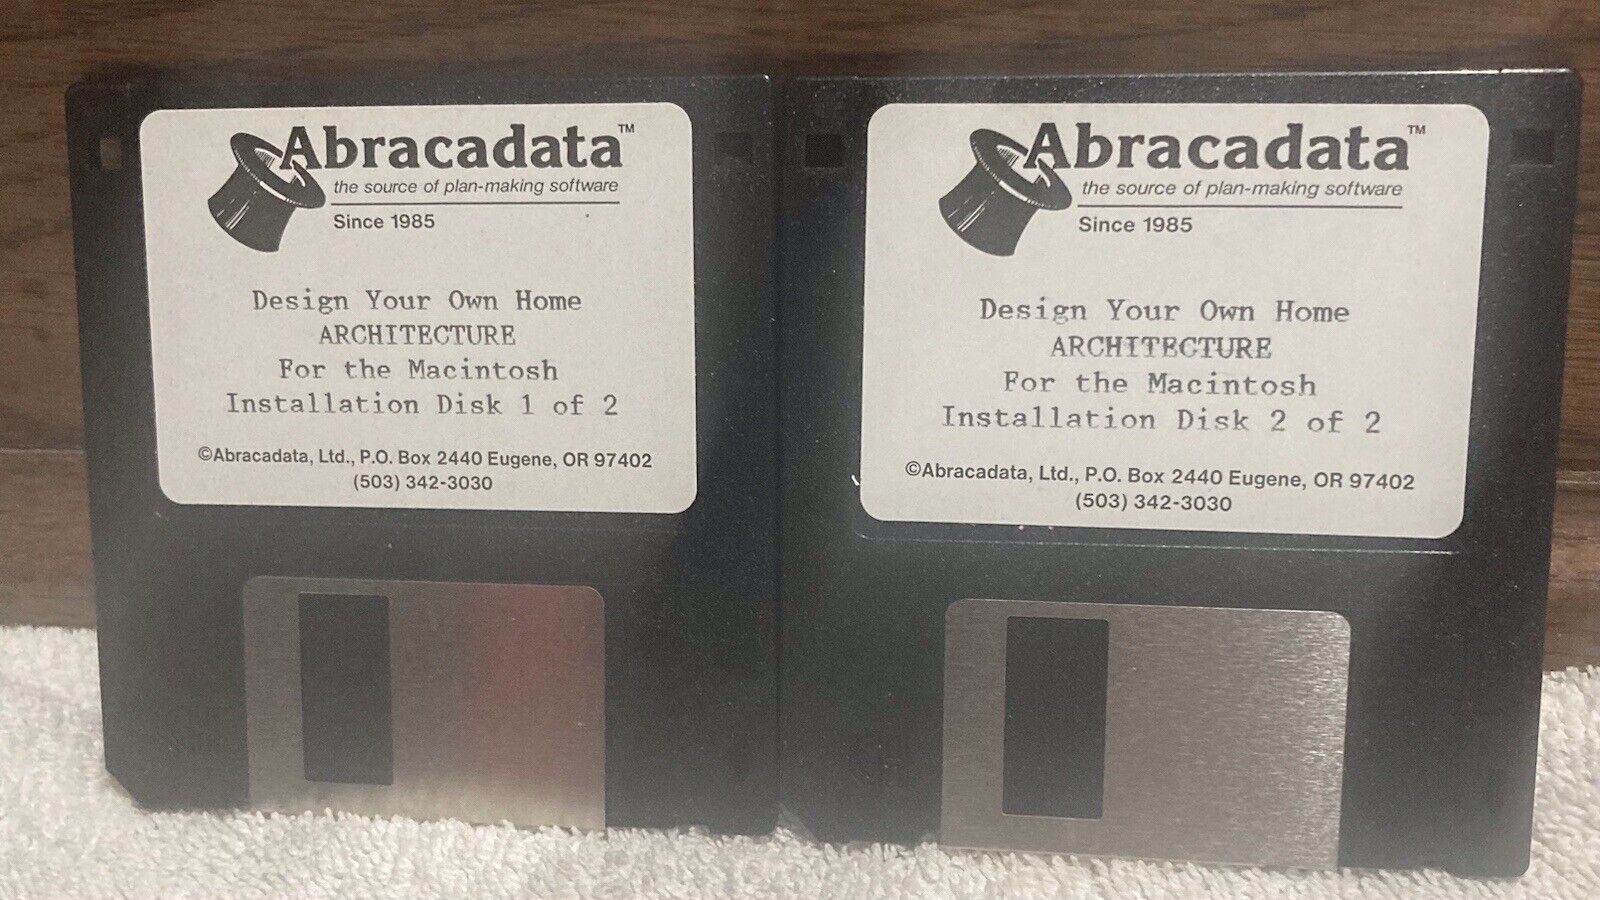 Abracadata ARCHITECTURE Design Your Own Home 2 Disks 3.5” | ON SALE WAS $29.50